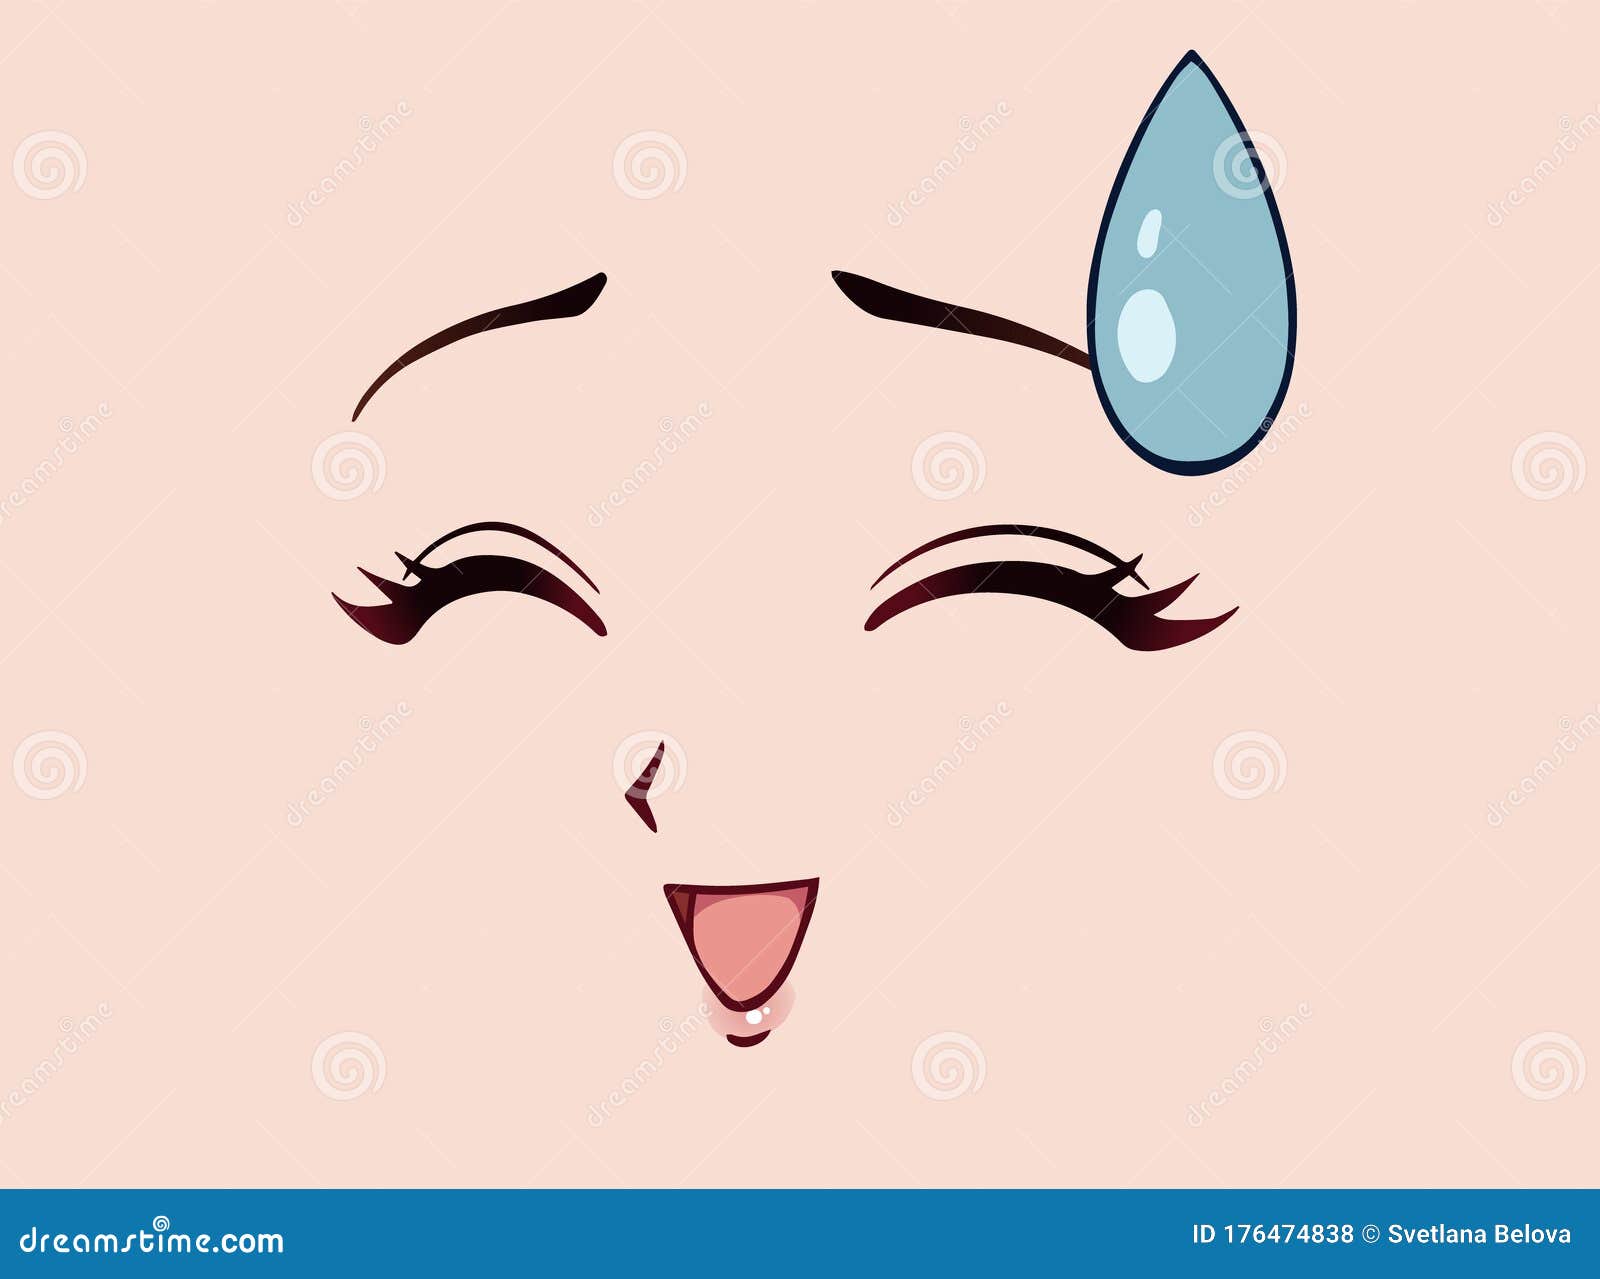 Happy Anime Face. Manga Style Closed Eyes, Little Nose and Kawaii Mouth  Stock Vector - Illustration of hair, graphic: 176474838